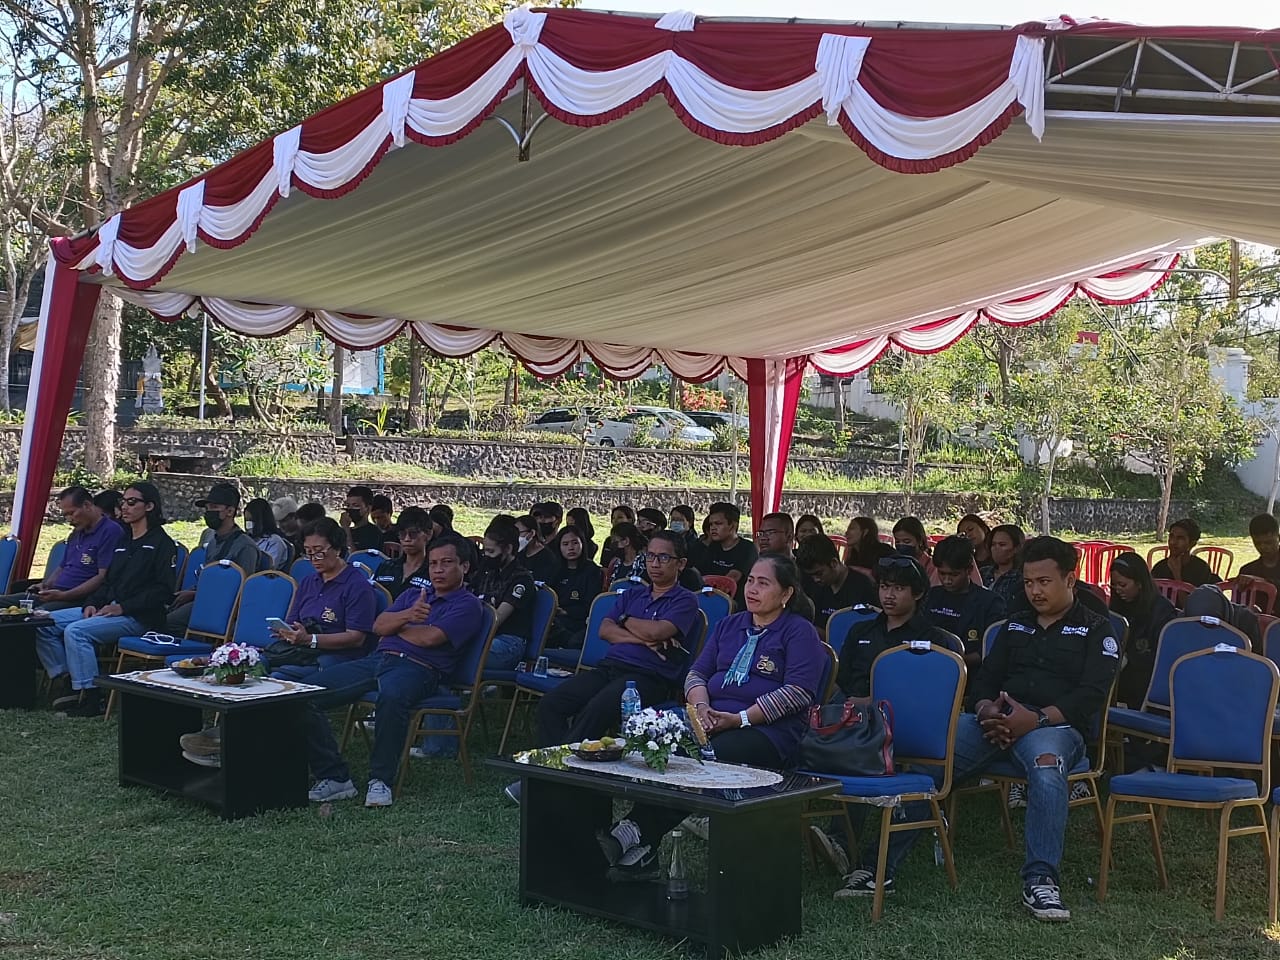 BEM-KM FACULTY OF LIVESTOCK HOLDS APPRECIATION STAGE AND PRODUCT WORK FESTIVAL TO CELEBRATE THE 60TH ANNIVERSARY OF FACULTY OF LIVESTOCK UDAYANA UNIVERSITY